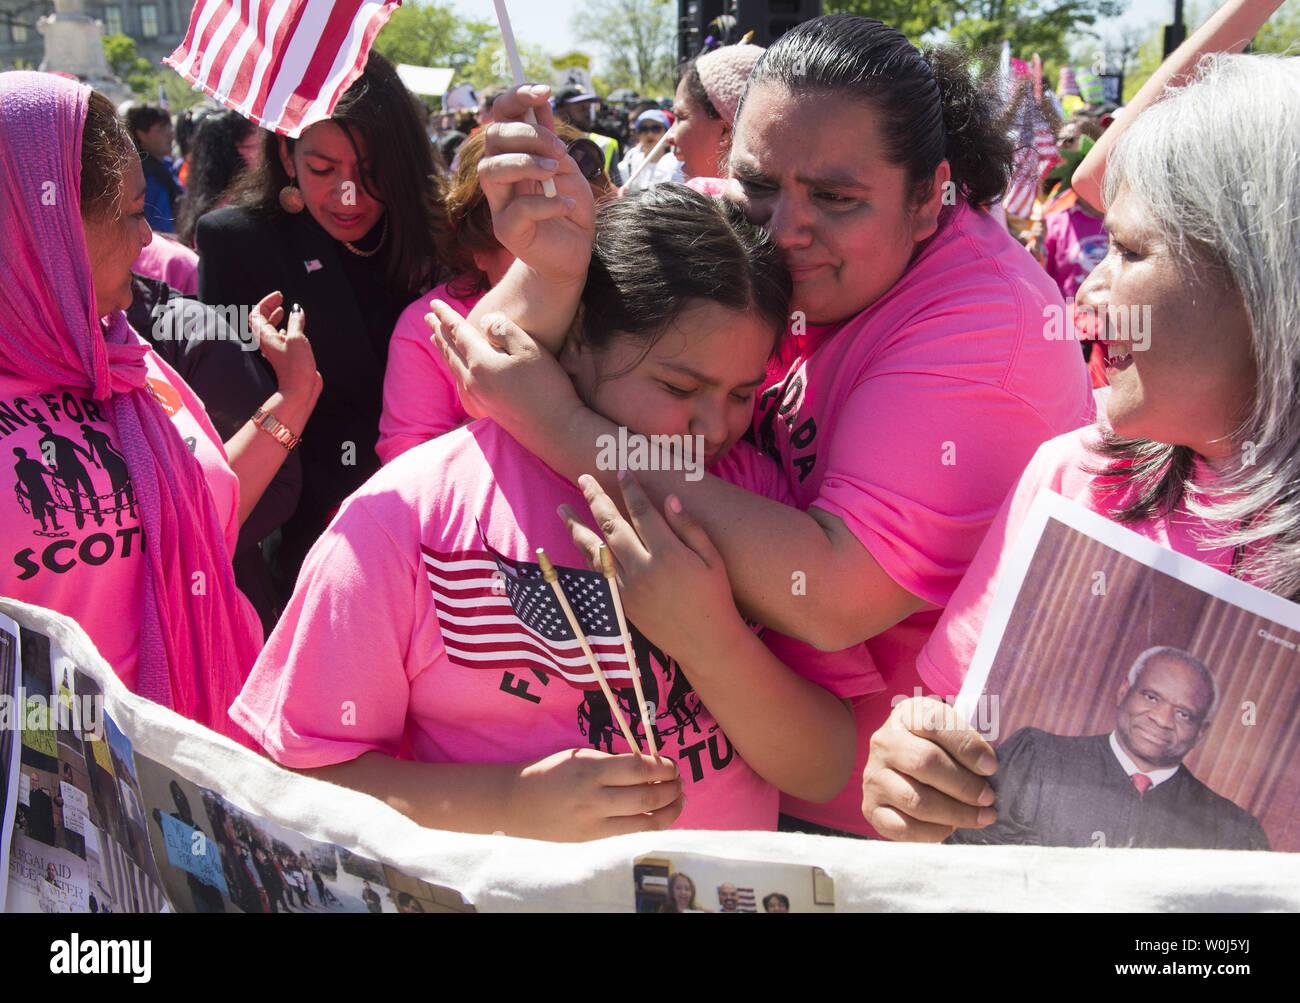 Protesters hugs outside of the Supreme Court as the Court hears oral arguments in the case of United States v. Texas, which will consider a legal challenge to the Deferred Action for Parents of Americans (DAPA) program and the expansion of the Deferred Action for Childhood Arrivals (DACA) program, in Washington, D.C. on April 18, 2016. Photo by Kevin Dietsch/UPI Stock Photo